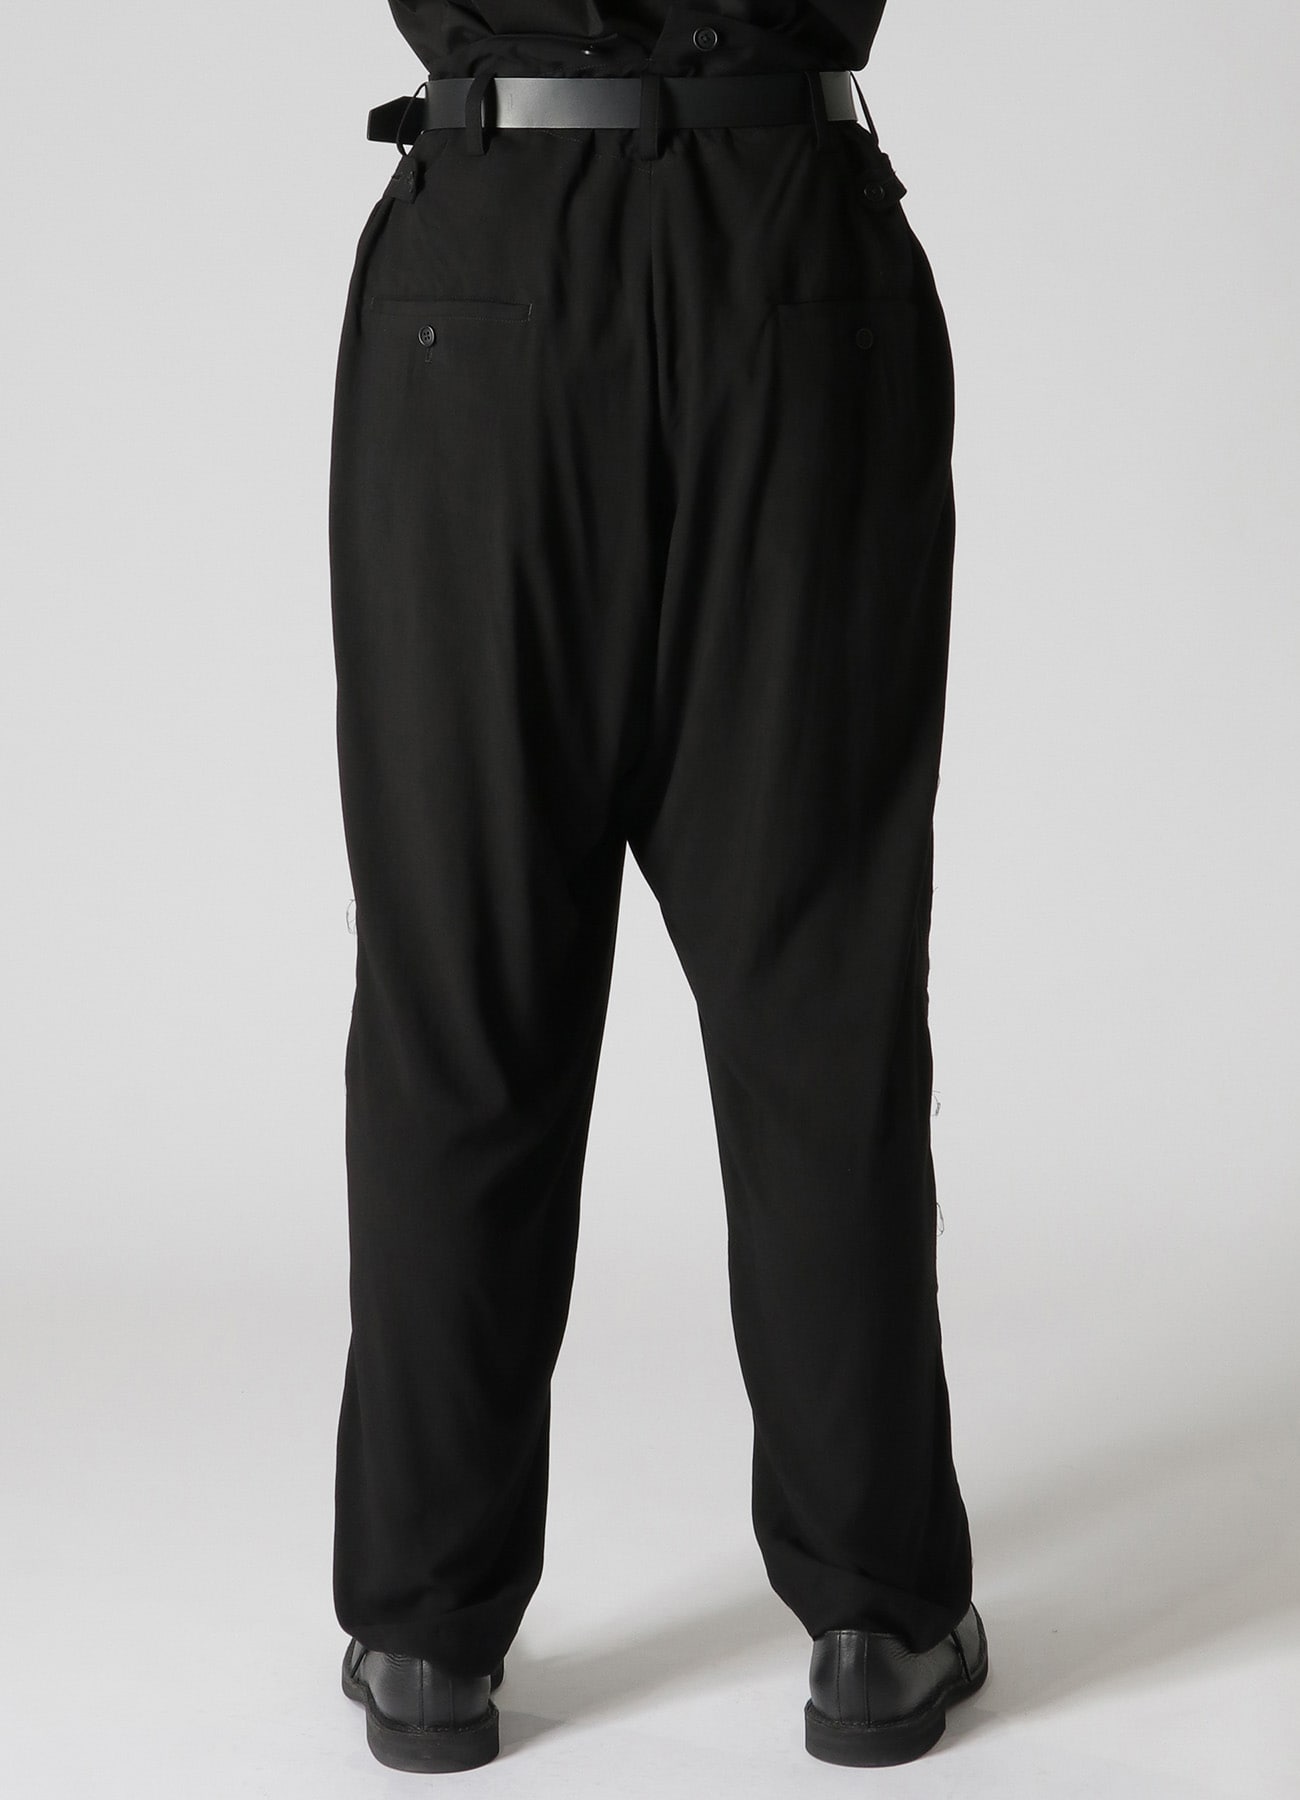 RAYON CAMBRIC SUSPENDER PANTS WITH SIDE DECORATIVE CLOTH